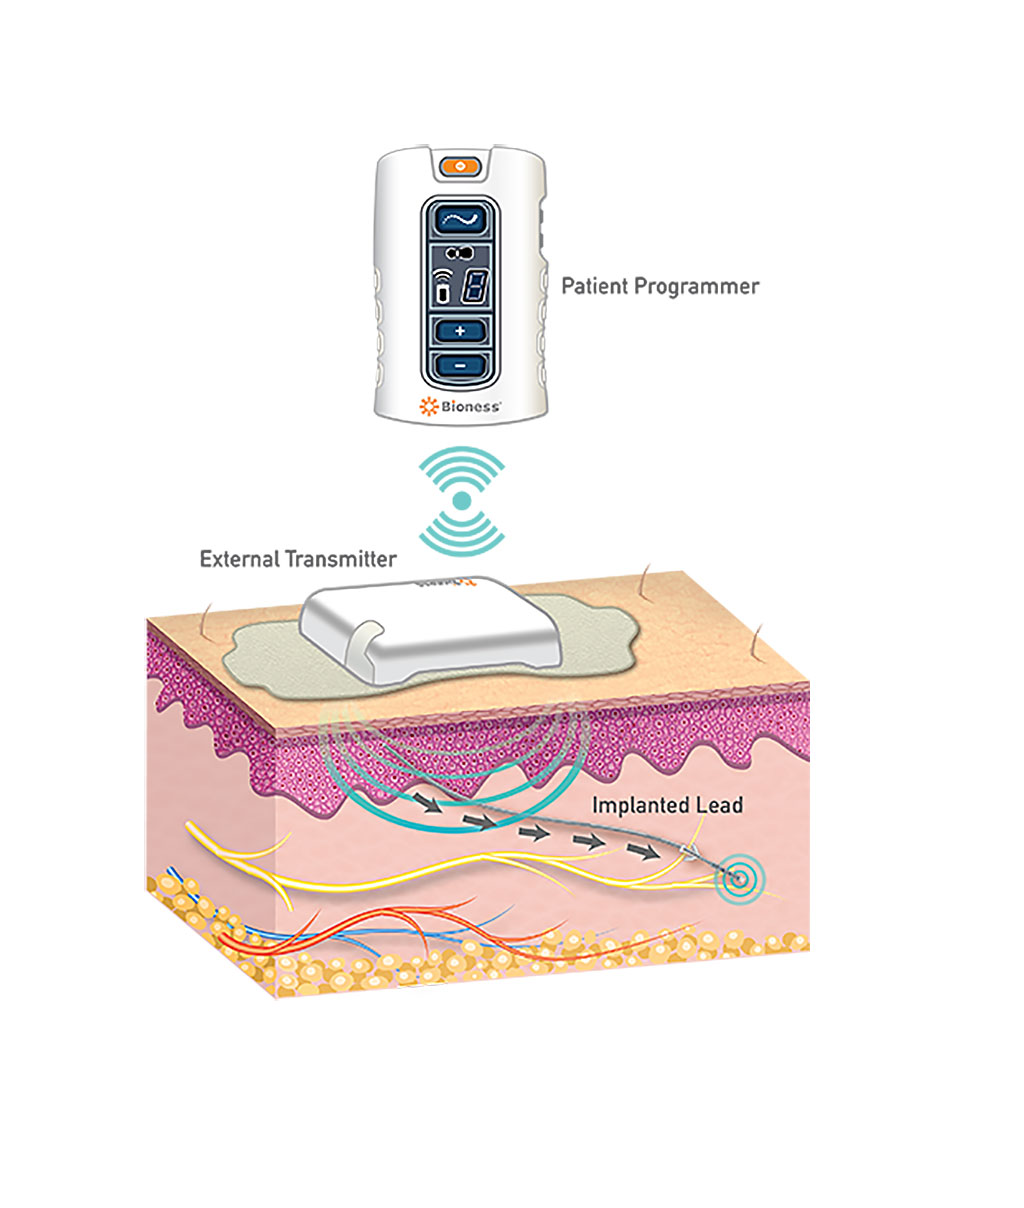 Image: The StimRouter neuromodulation system (Photo courtesy of Bioness)